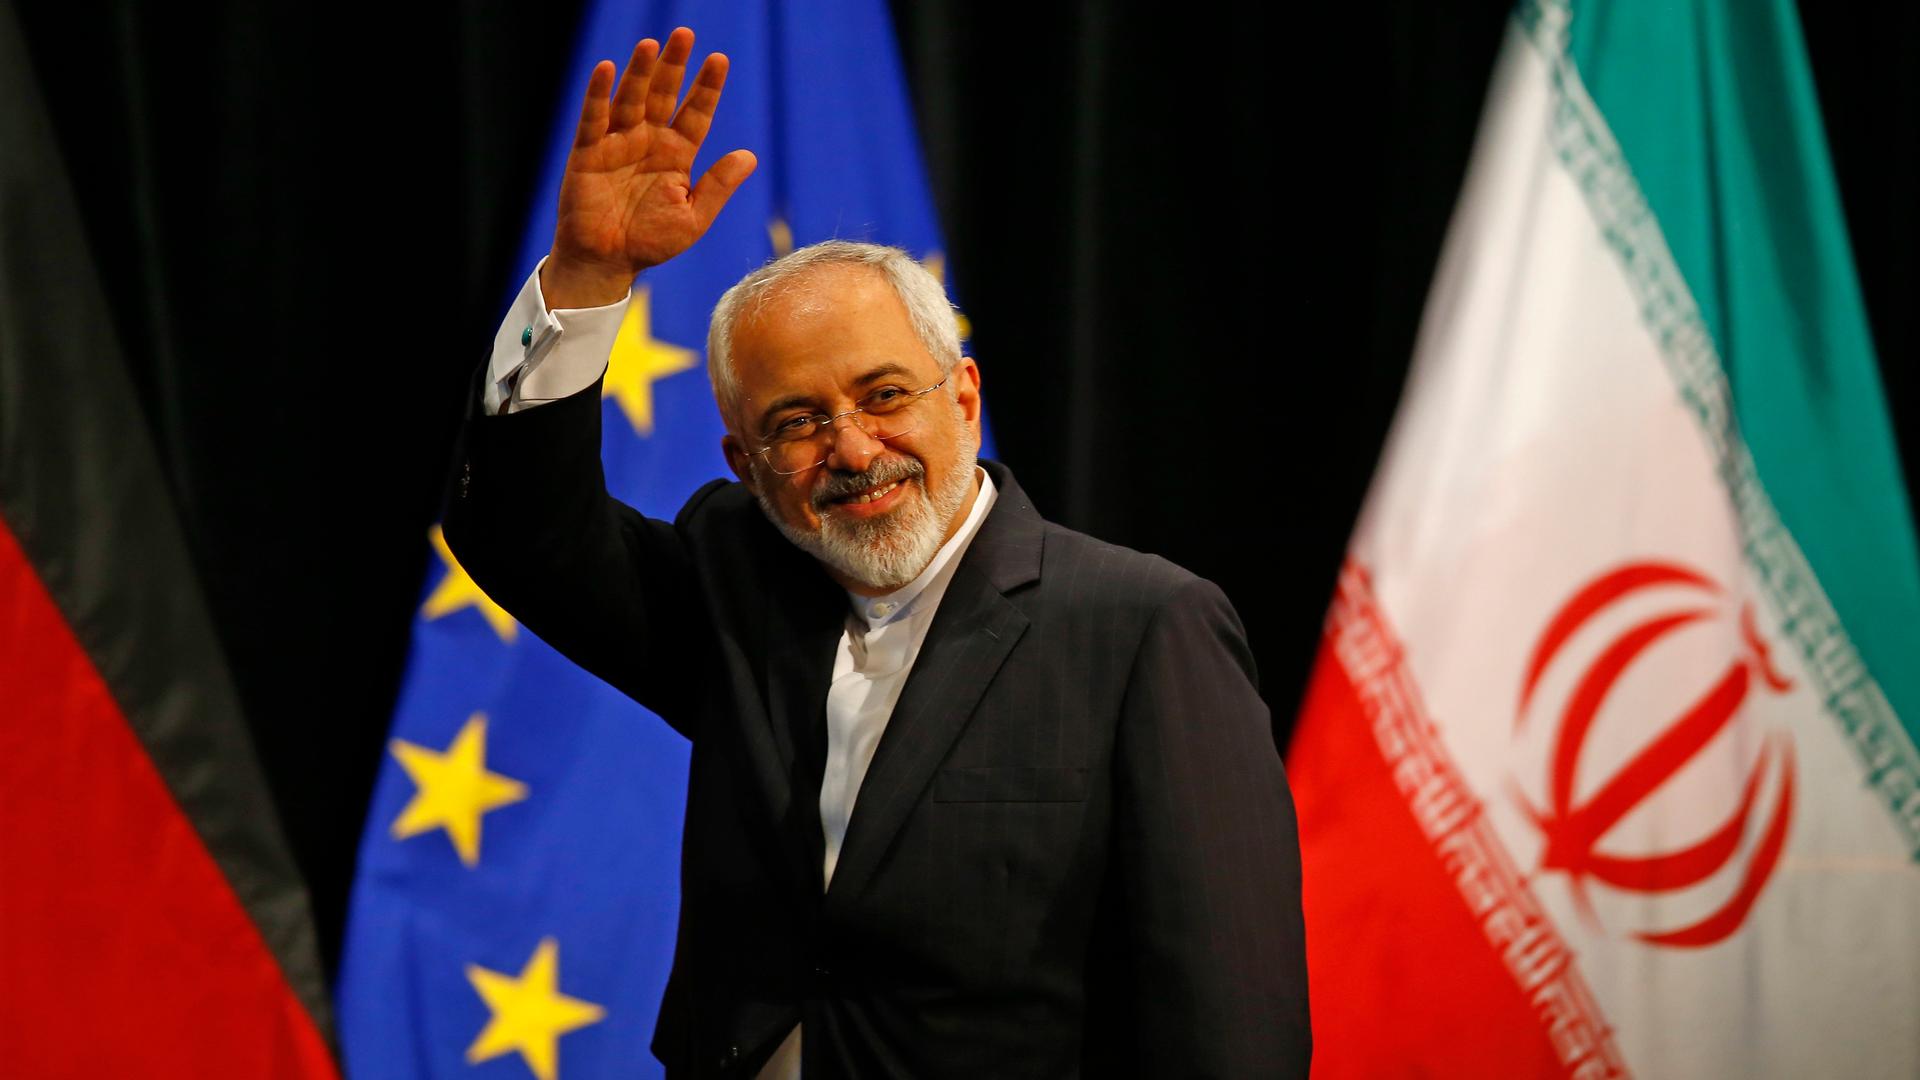 Iranian Foreign Minister Mohammad Javad Zarif waves after a plenary session at the United Nations building in Vienna, Austria July 14, 2015.